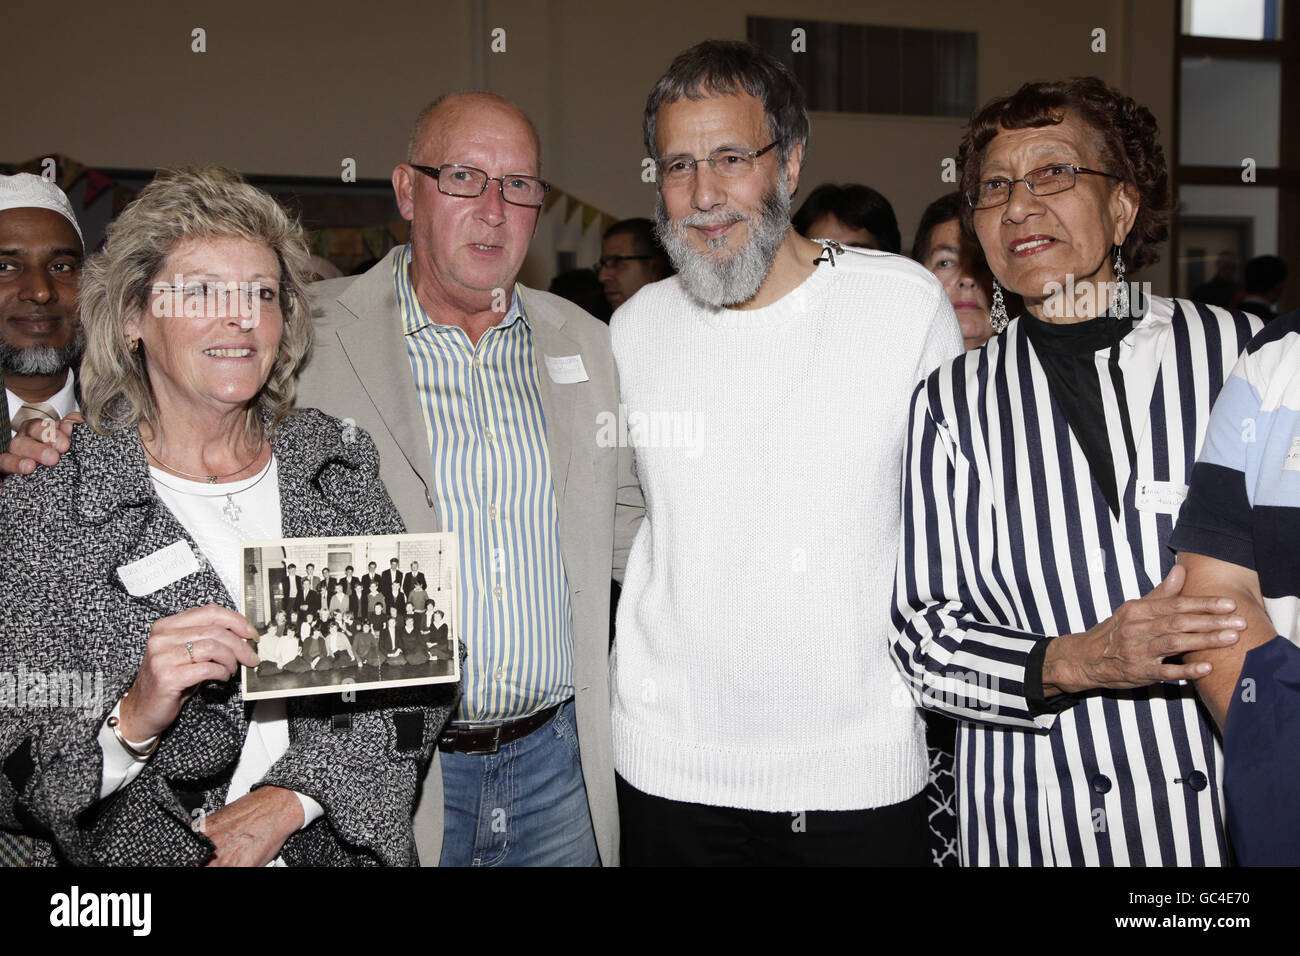 Yusuf Islam (2nd right) with one of his former teachers Yuna Simpson (right) and former school friends Janet Dowling (holding an old class photograph with a young Yusuf pictured) and John Langsworthy during his visit to his old school Hugh Myddelton Primary School. Stock Photo